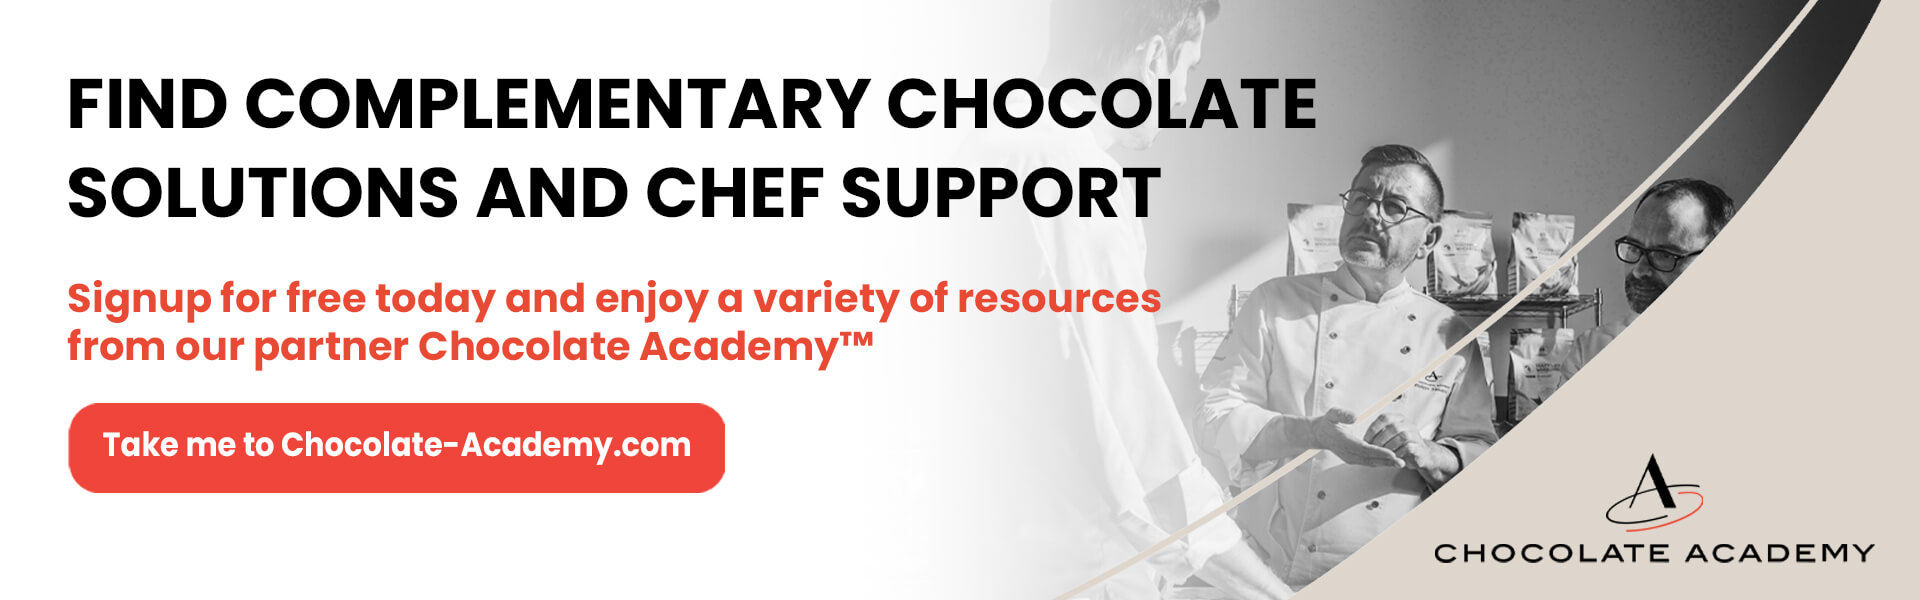 Find complementary chocolate solutions and chef support / Signup for free today and enjoy a variety of resources from our partner Chocolate Academy™